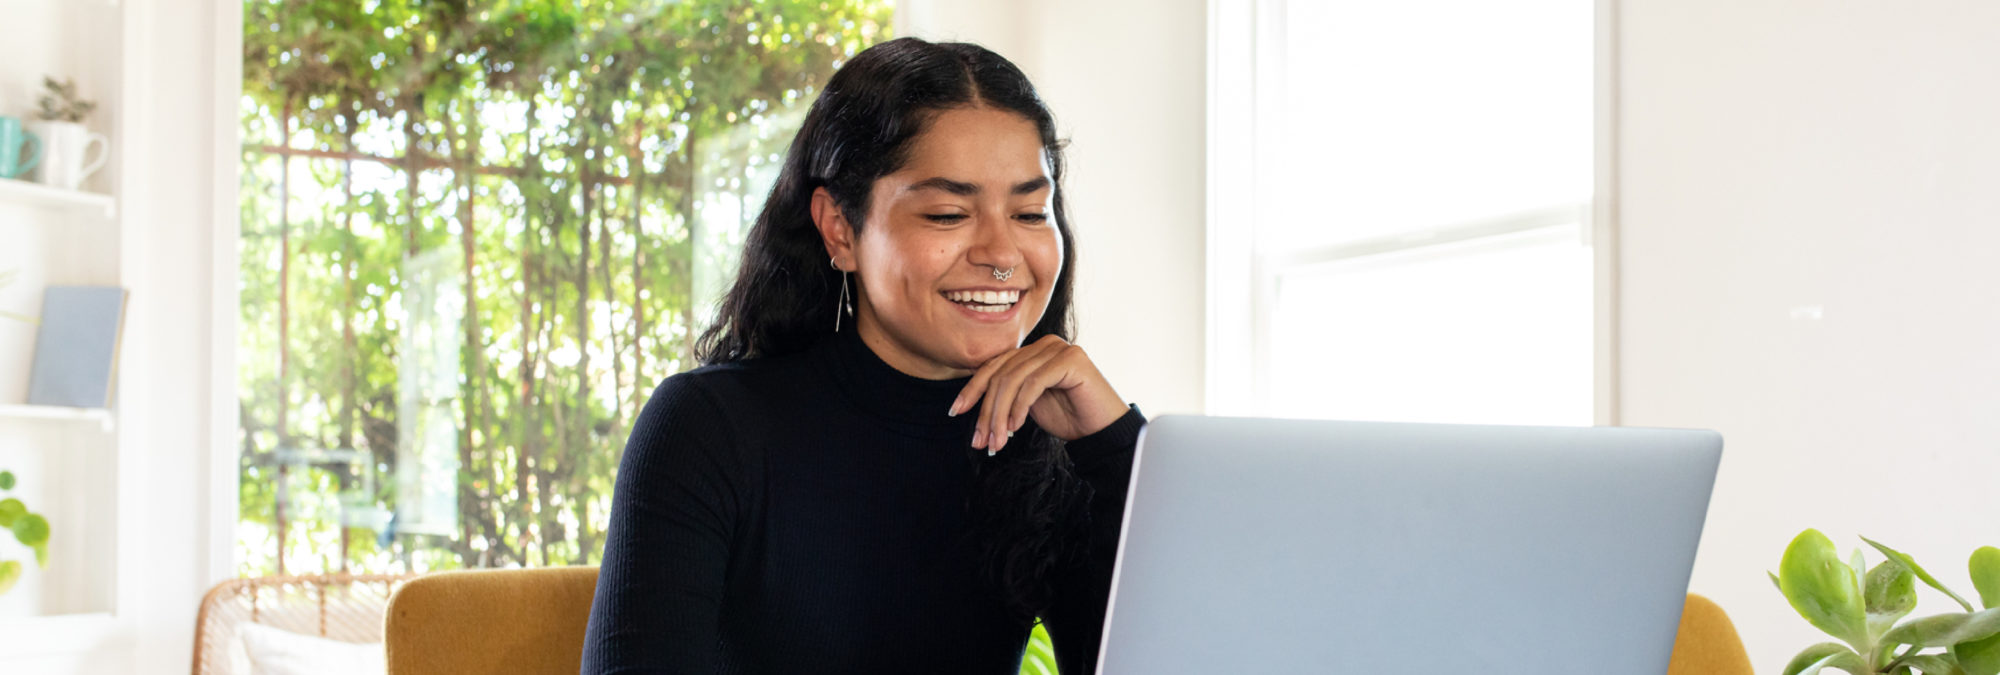 Female student in black sweater smiling at laptop